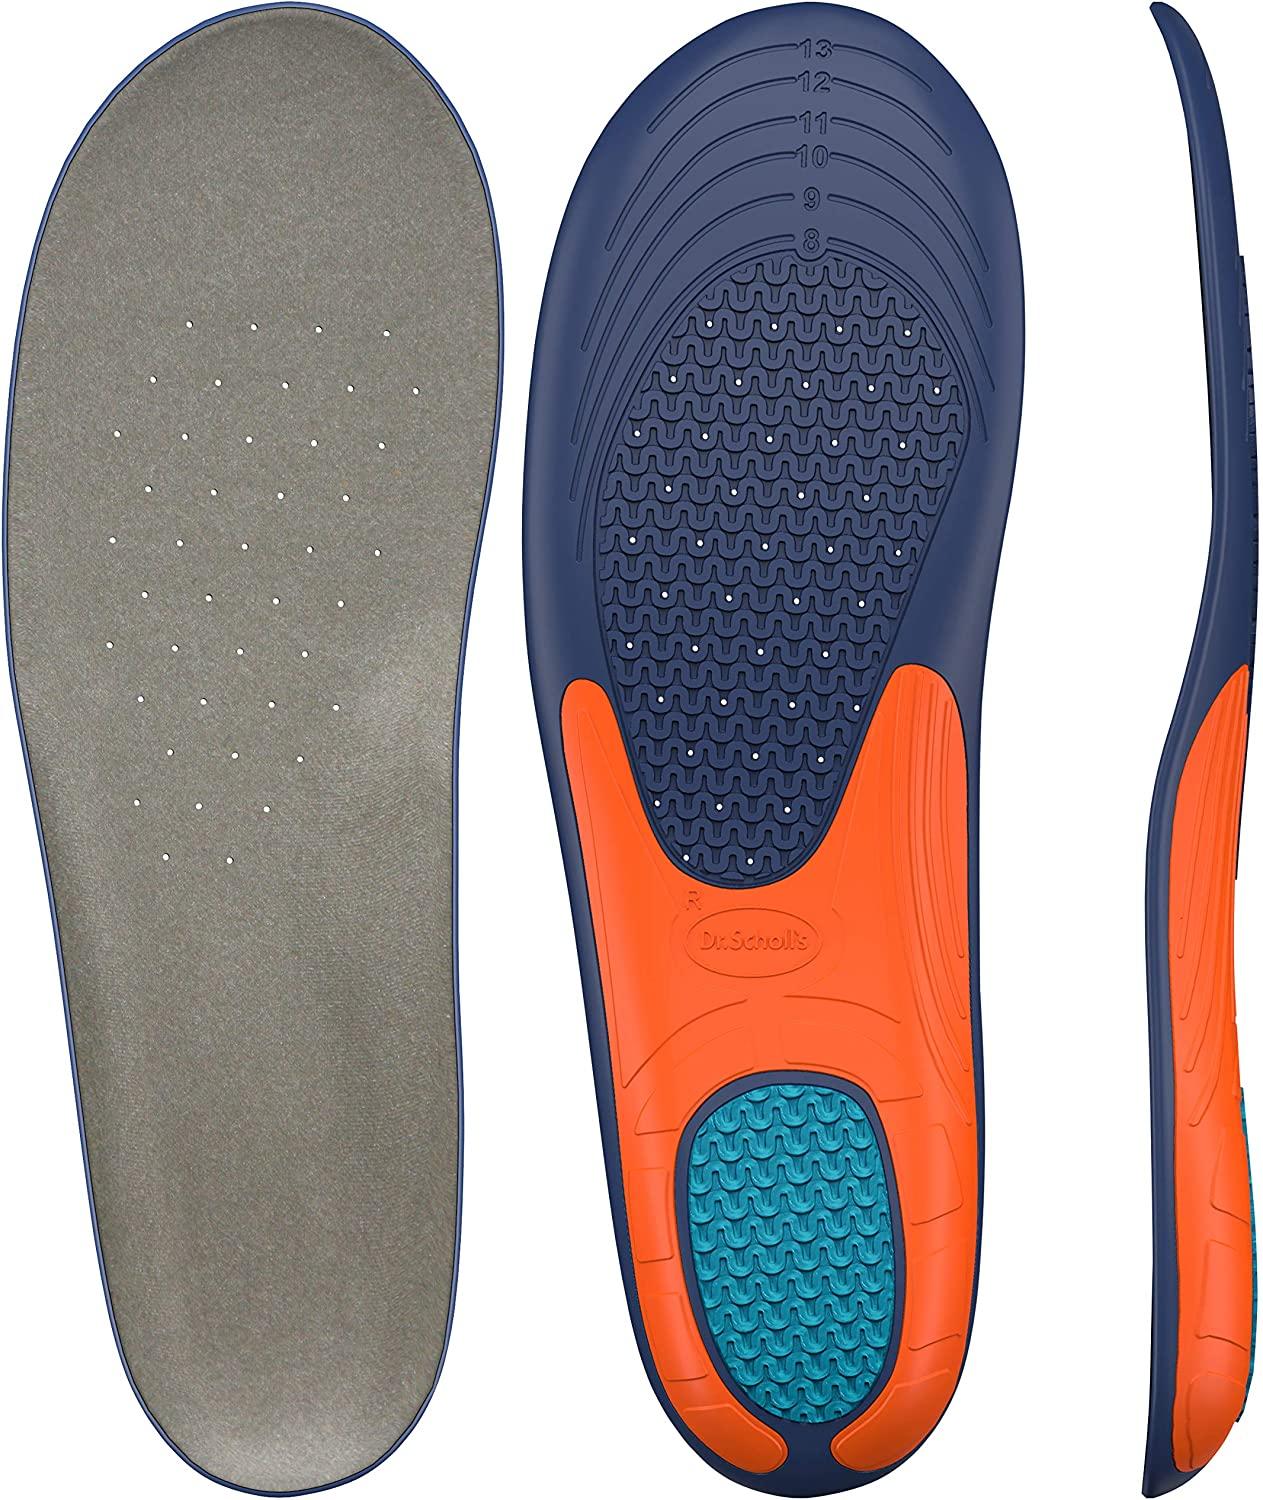 Dr. Scholl's Extra Support Insoles Superior Shock Absorption and